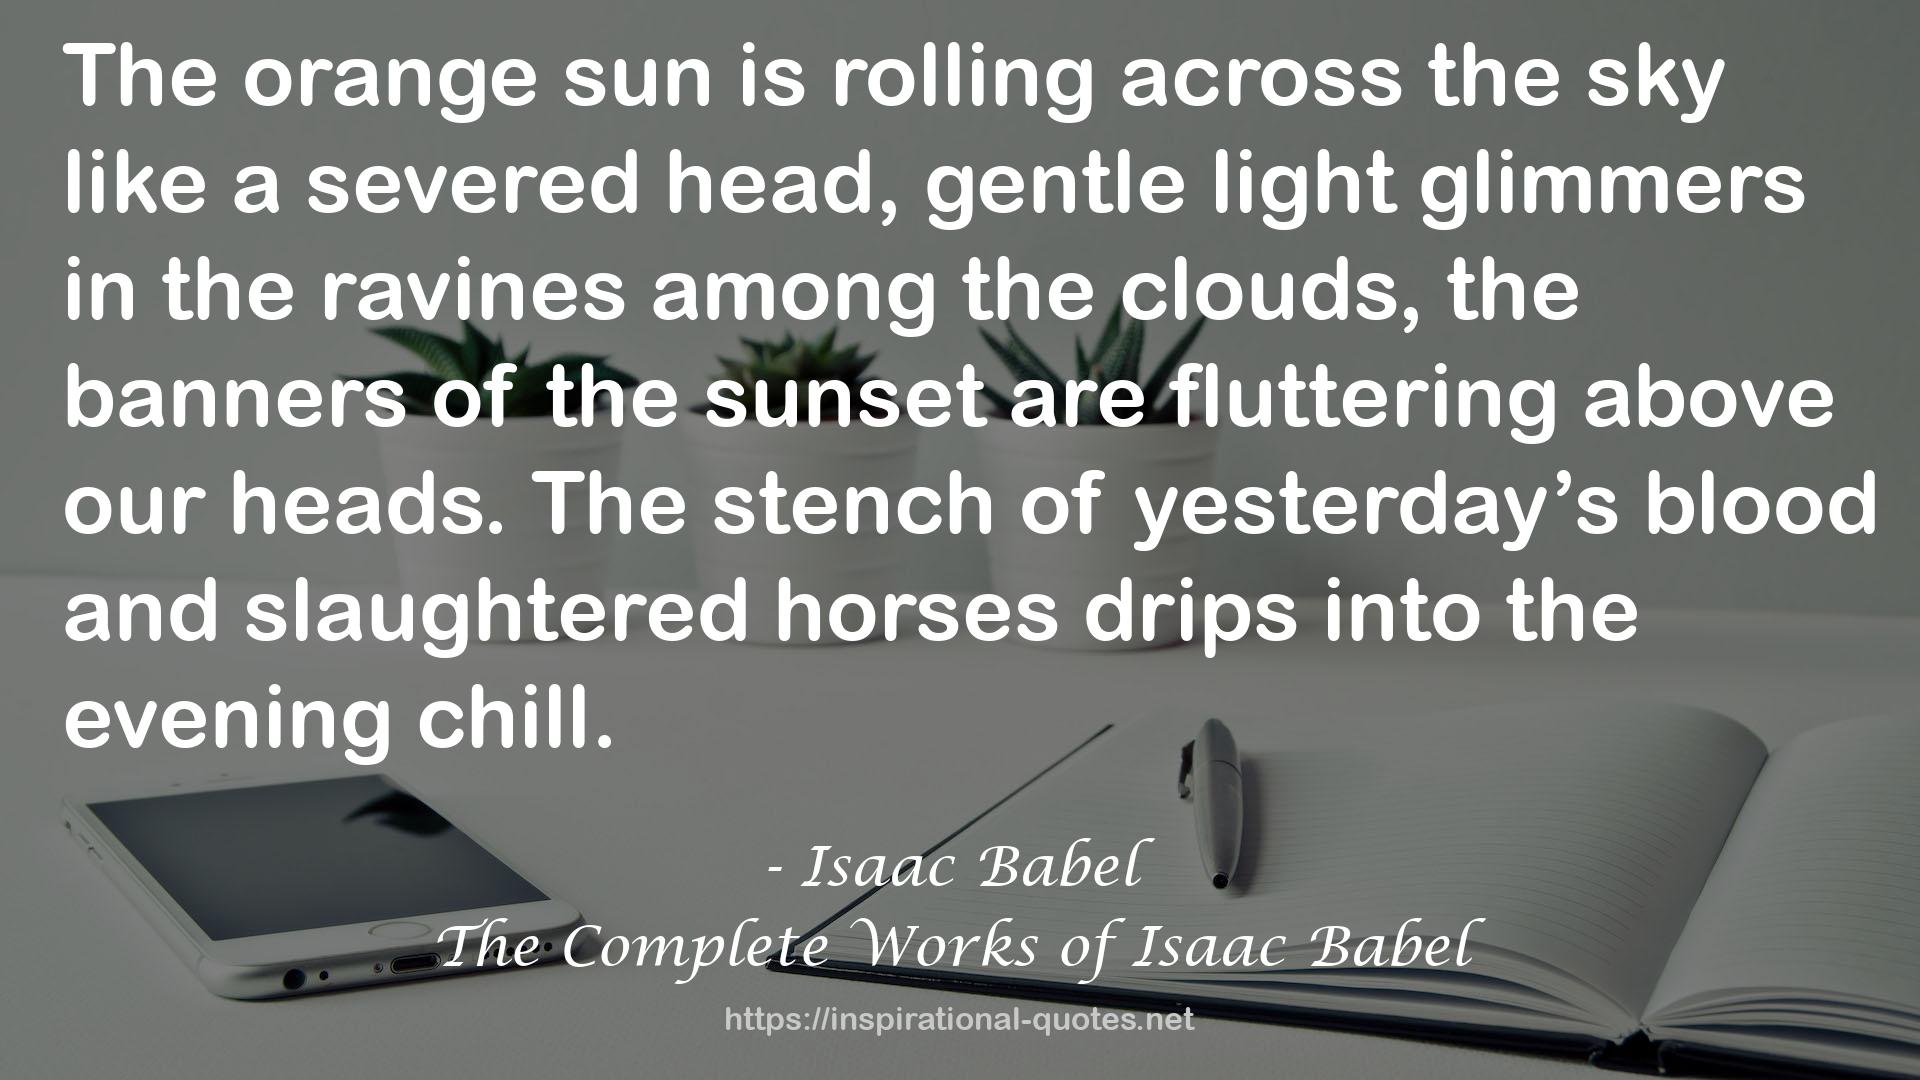 The Complete Works of Isaac Babel QUOTES